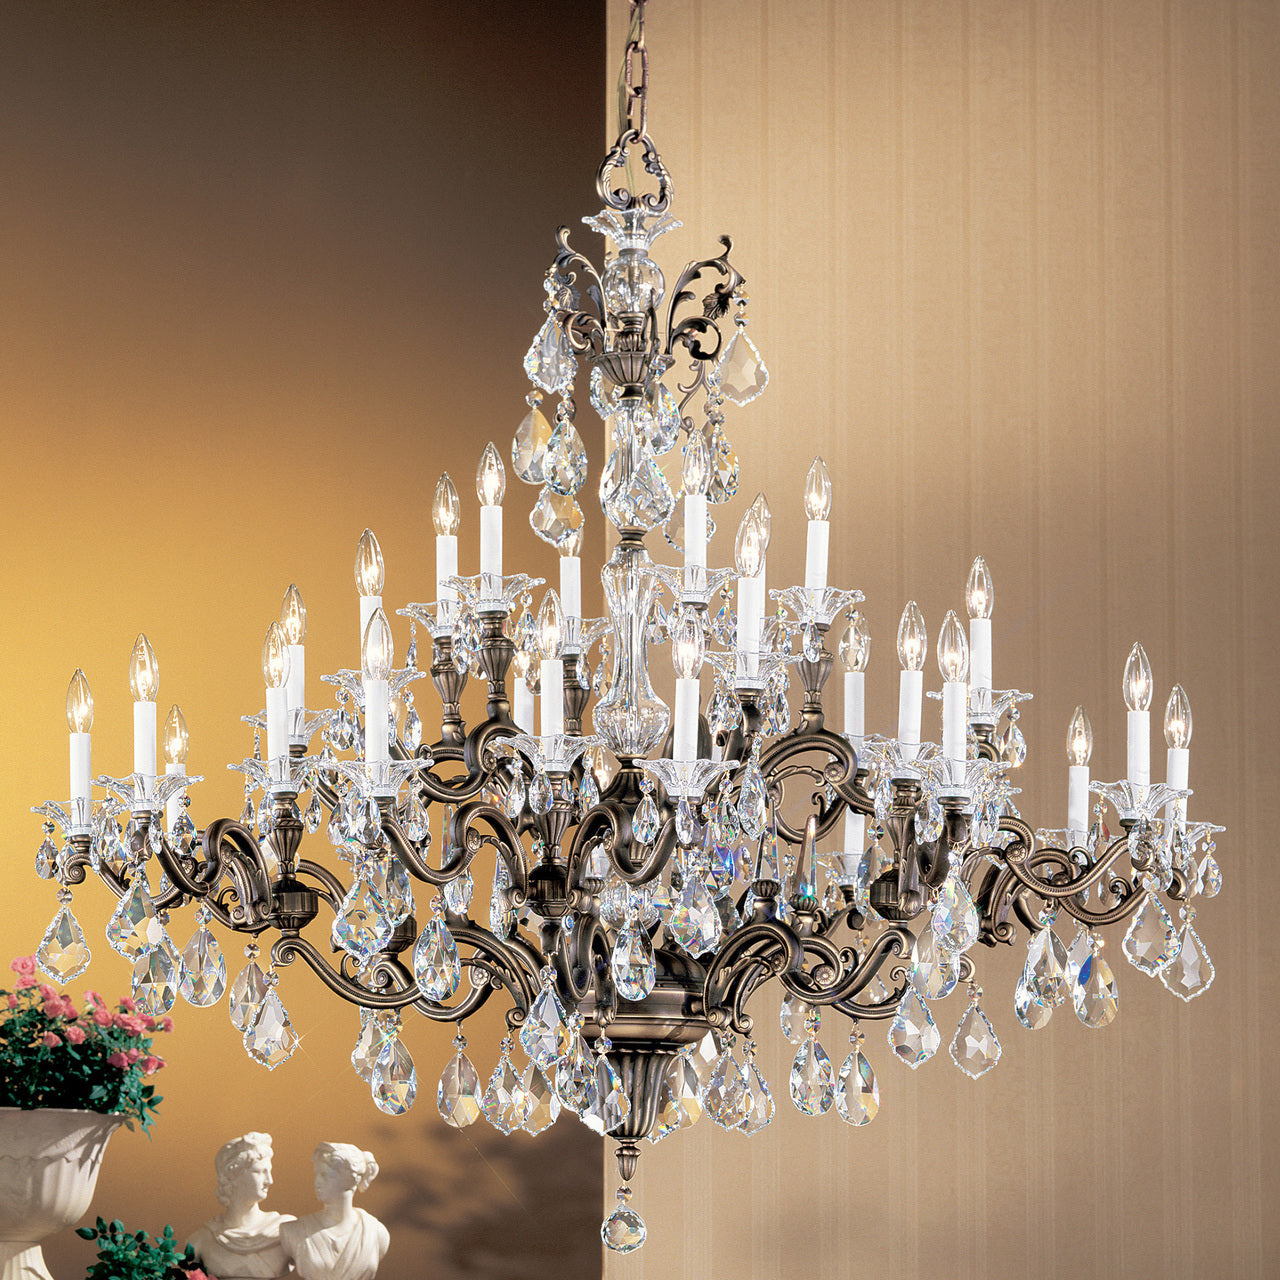 Classic Lighting 57130 RB C Via Firenze Crystal Chandelier in Roman Bronze (Imported from Spain)